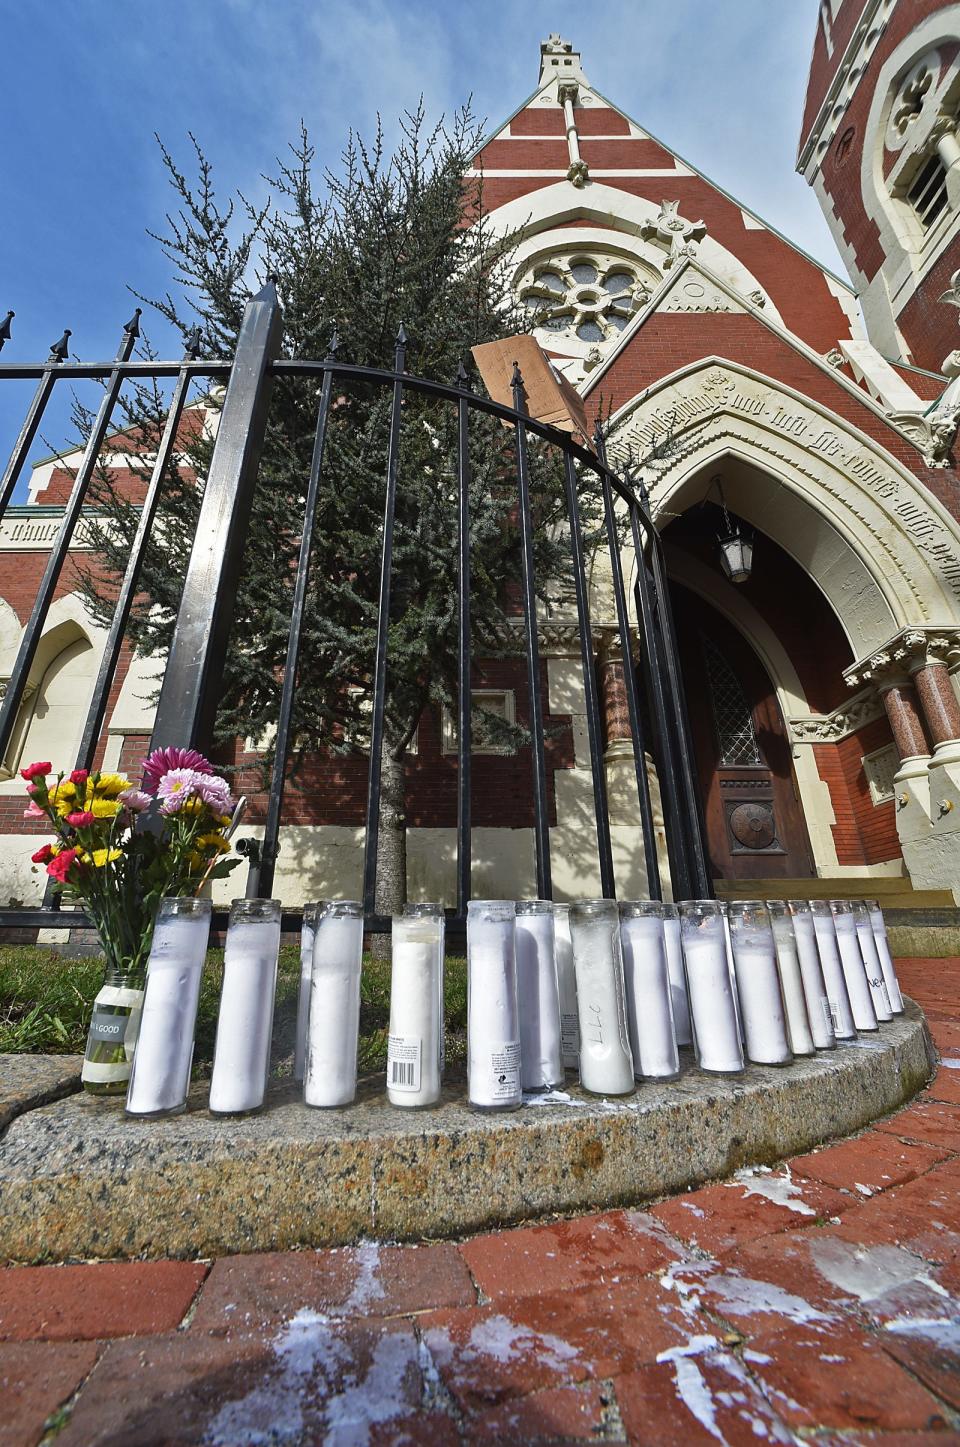 A memorial outside of the Abbey Grill on Rock Street in Fall River is seen Friday, March 15, following the fatal shooting Thursday, March 14 of 18-year-old Resiliency Preparatory Academy student Colus Jamal Mills-Good.